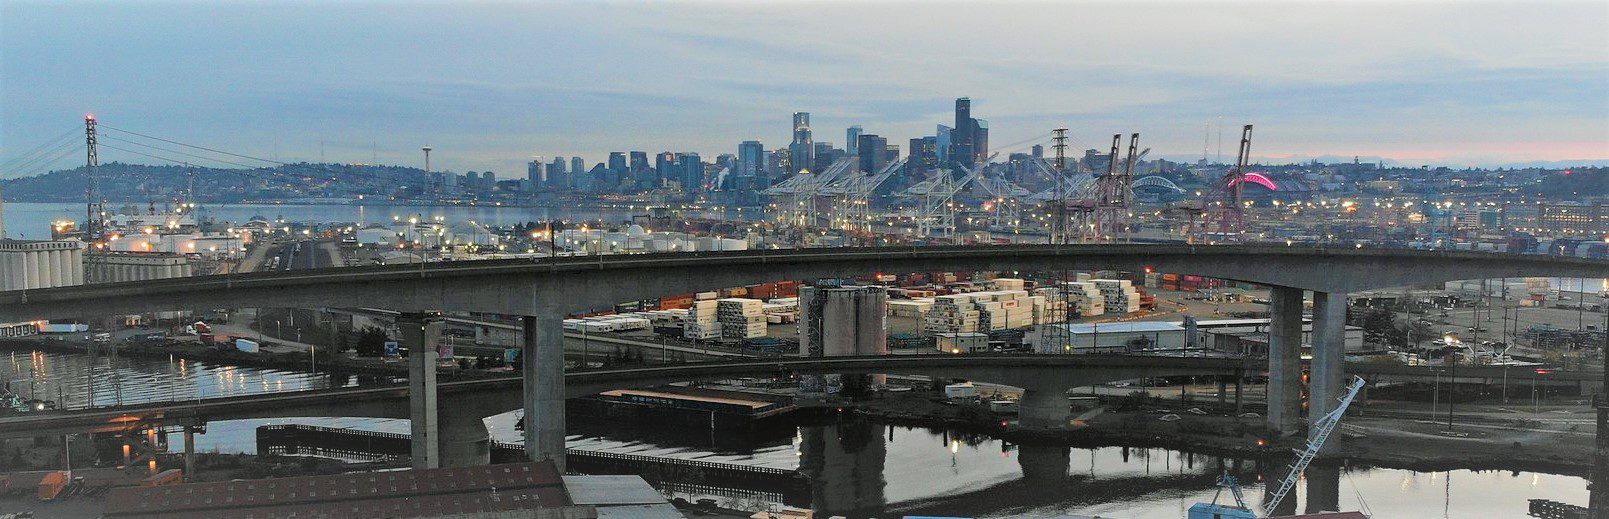 A north-facing photo with the West Seattle bridge in the foreground over water with the stadiums and the downtown Seattle skyline in the background.